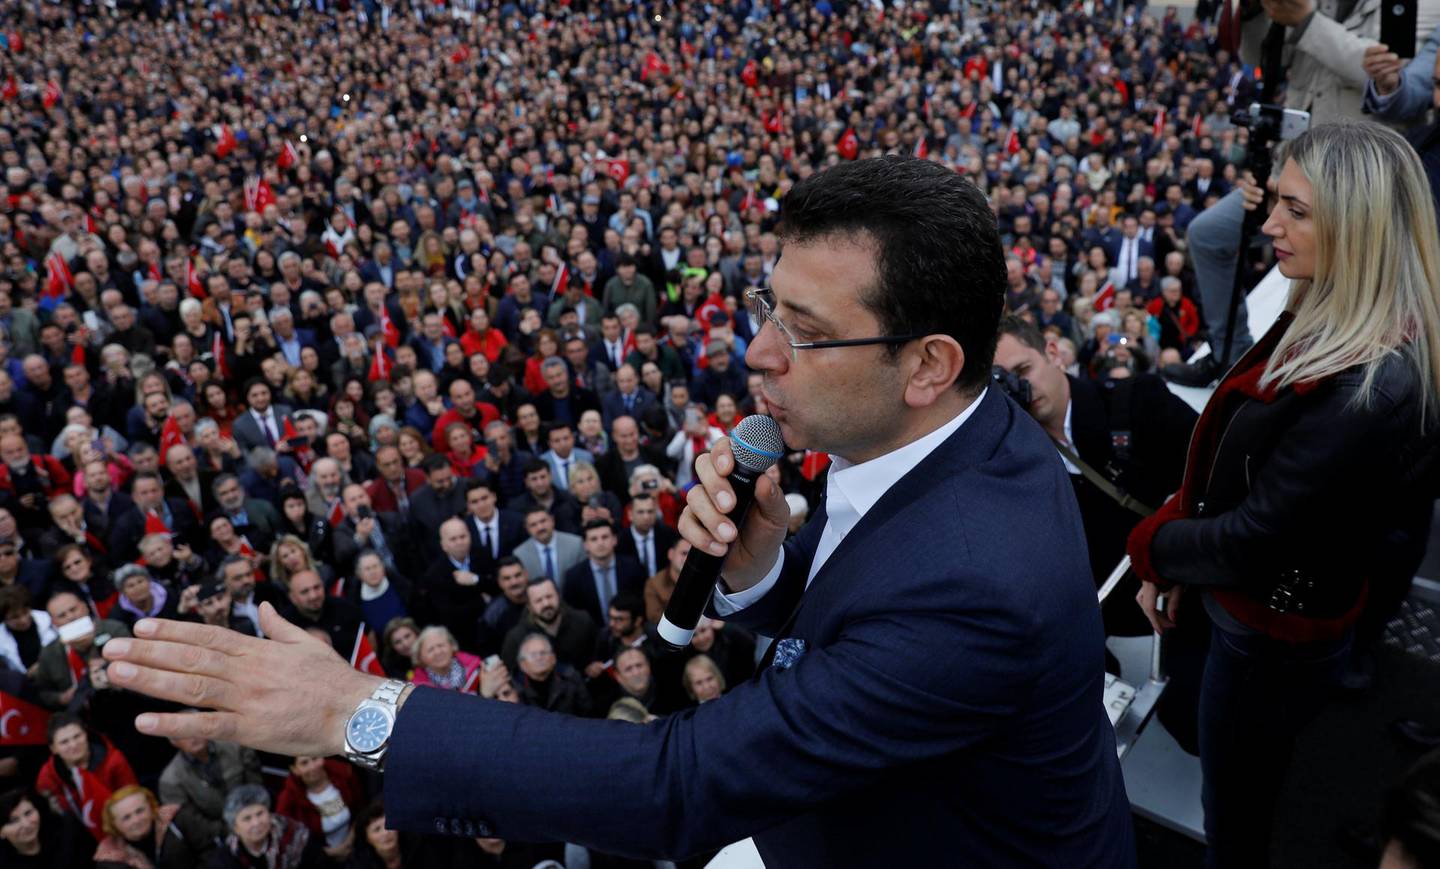 Main opposition Republican People's Party (CHP) mayoral candidate Ekrem Imamoglu addresses his supporters as he is accompanied by his wife Dilek Imamoglu during a gathering in Istanbul, Turkey, April 9, 2019. REUTERS/Umit Bektas